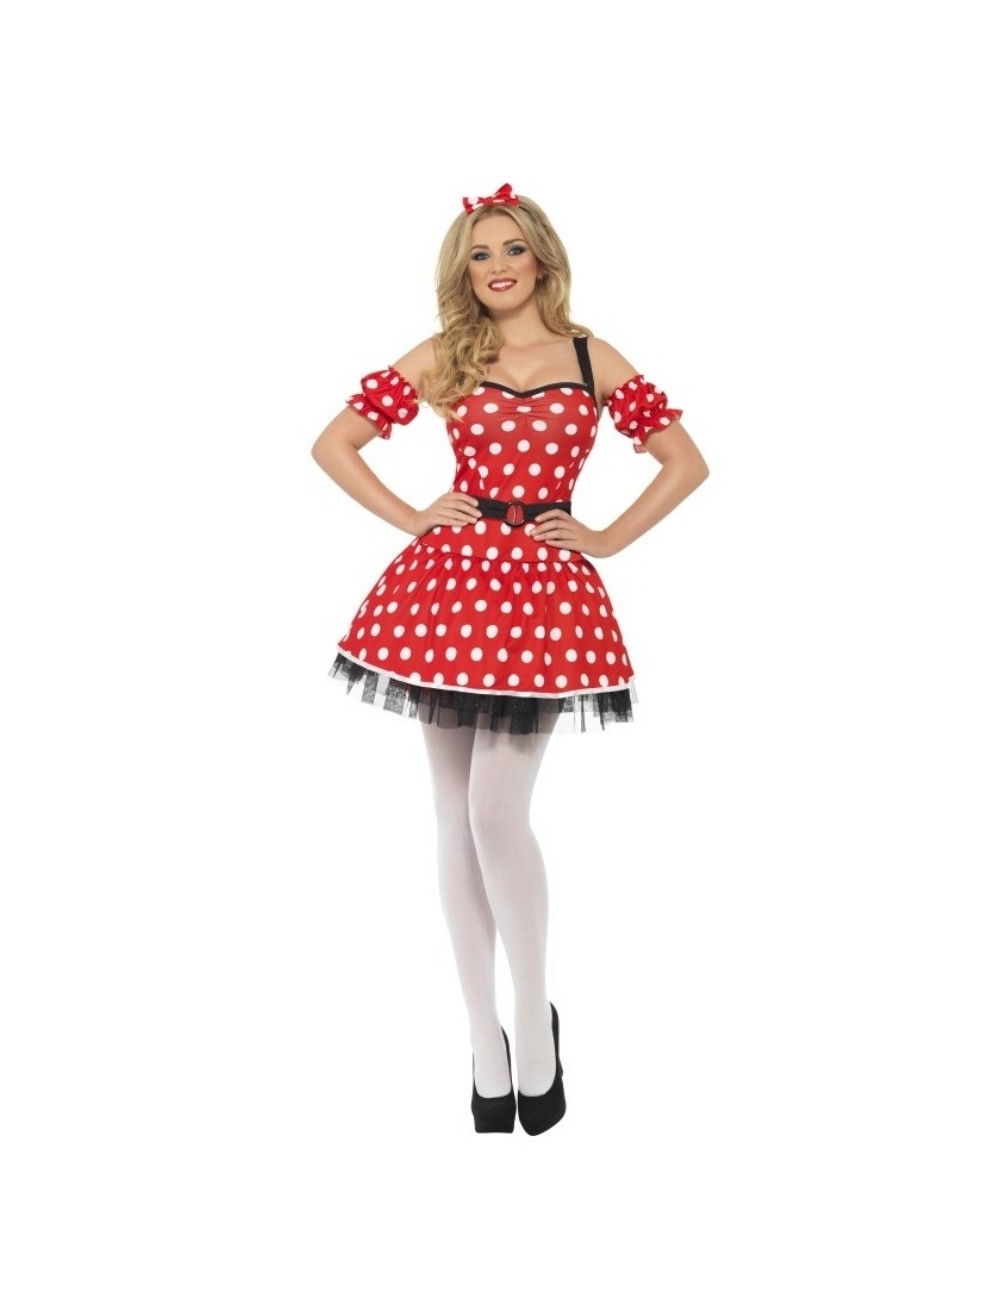 Costume Minnie Mouse